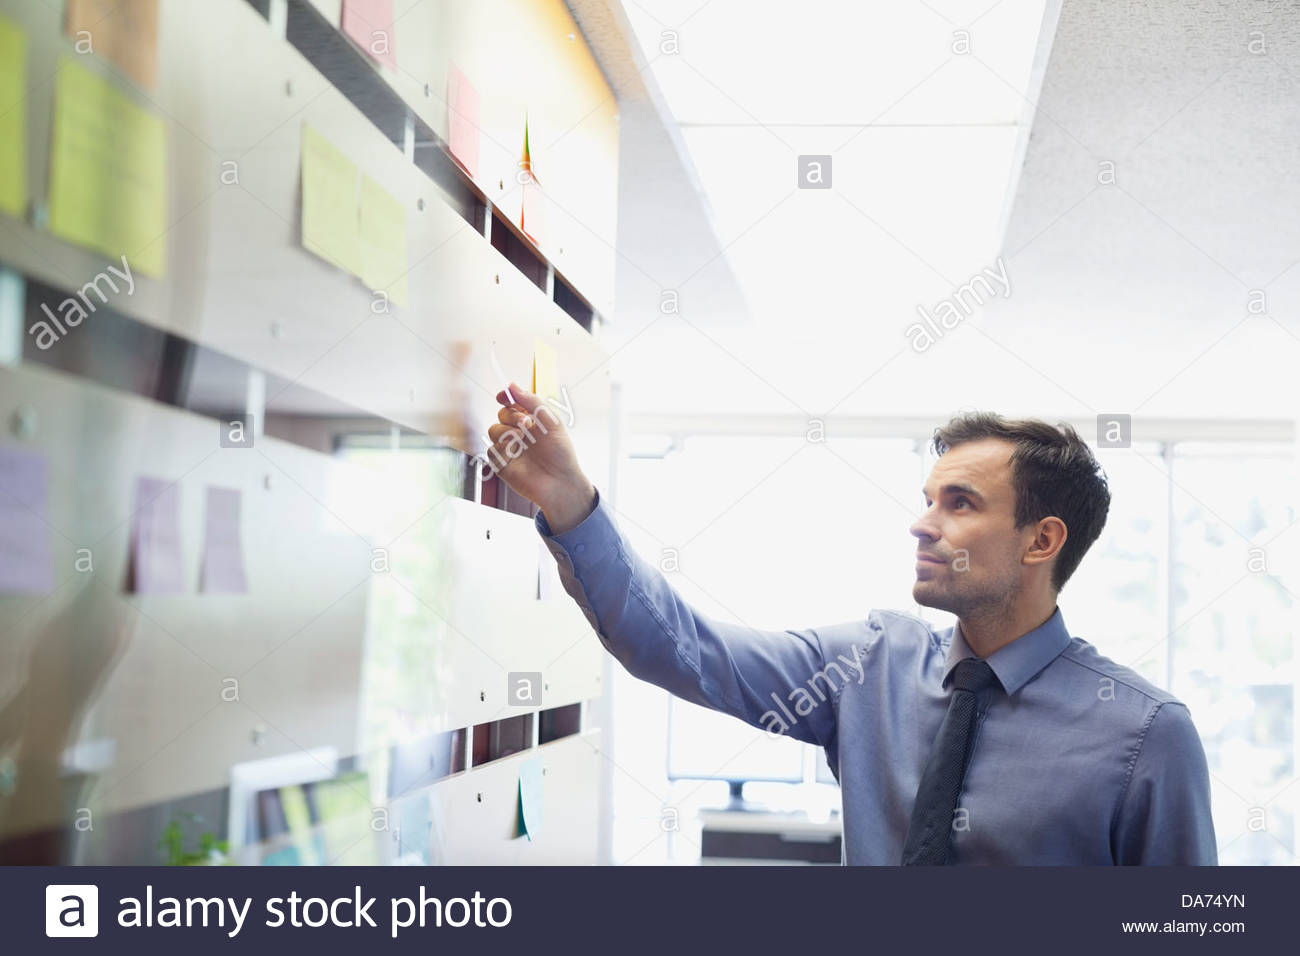 Businessman putting sticky note on wall Stock Photo